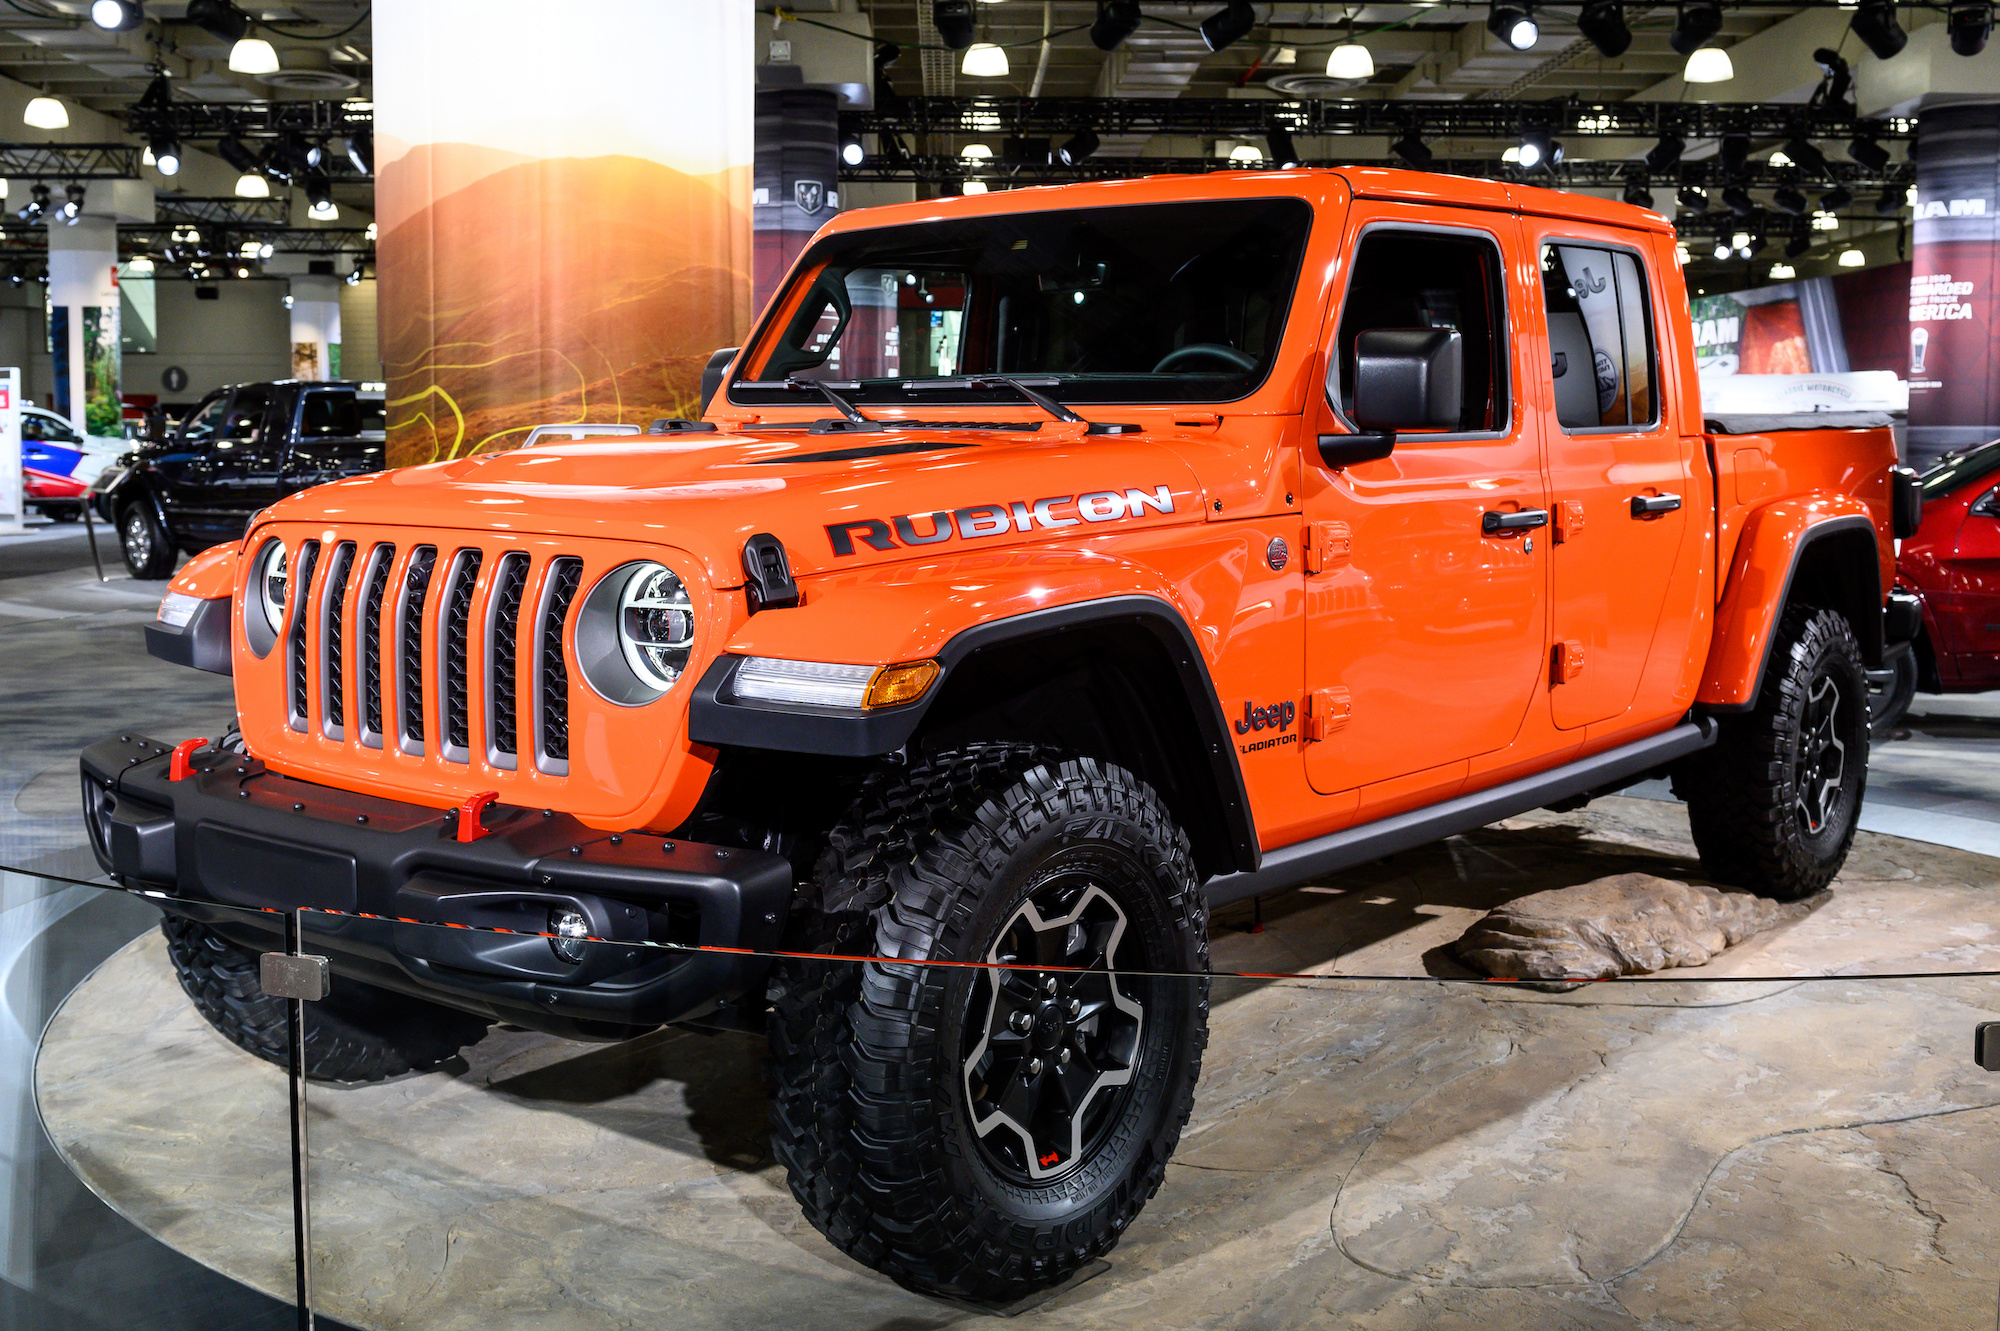 Jeep Gladiator Rubicon seen at the New York International Auto Show